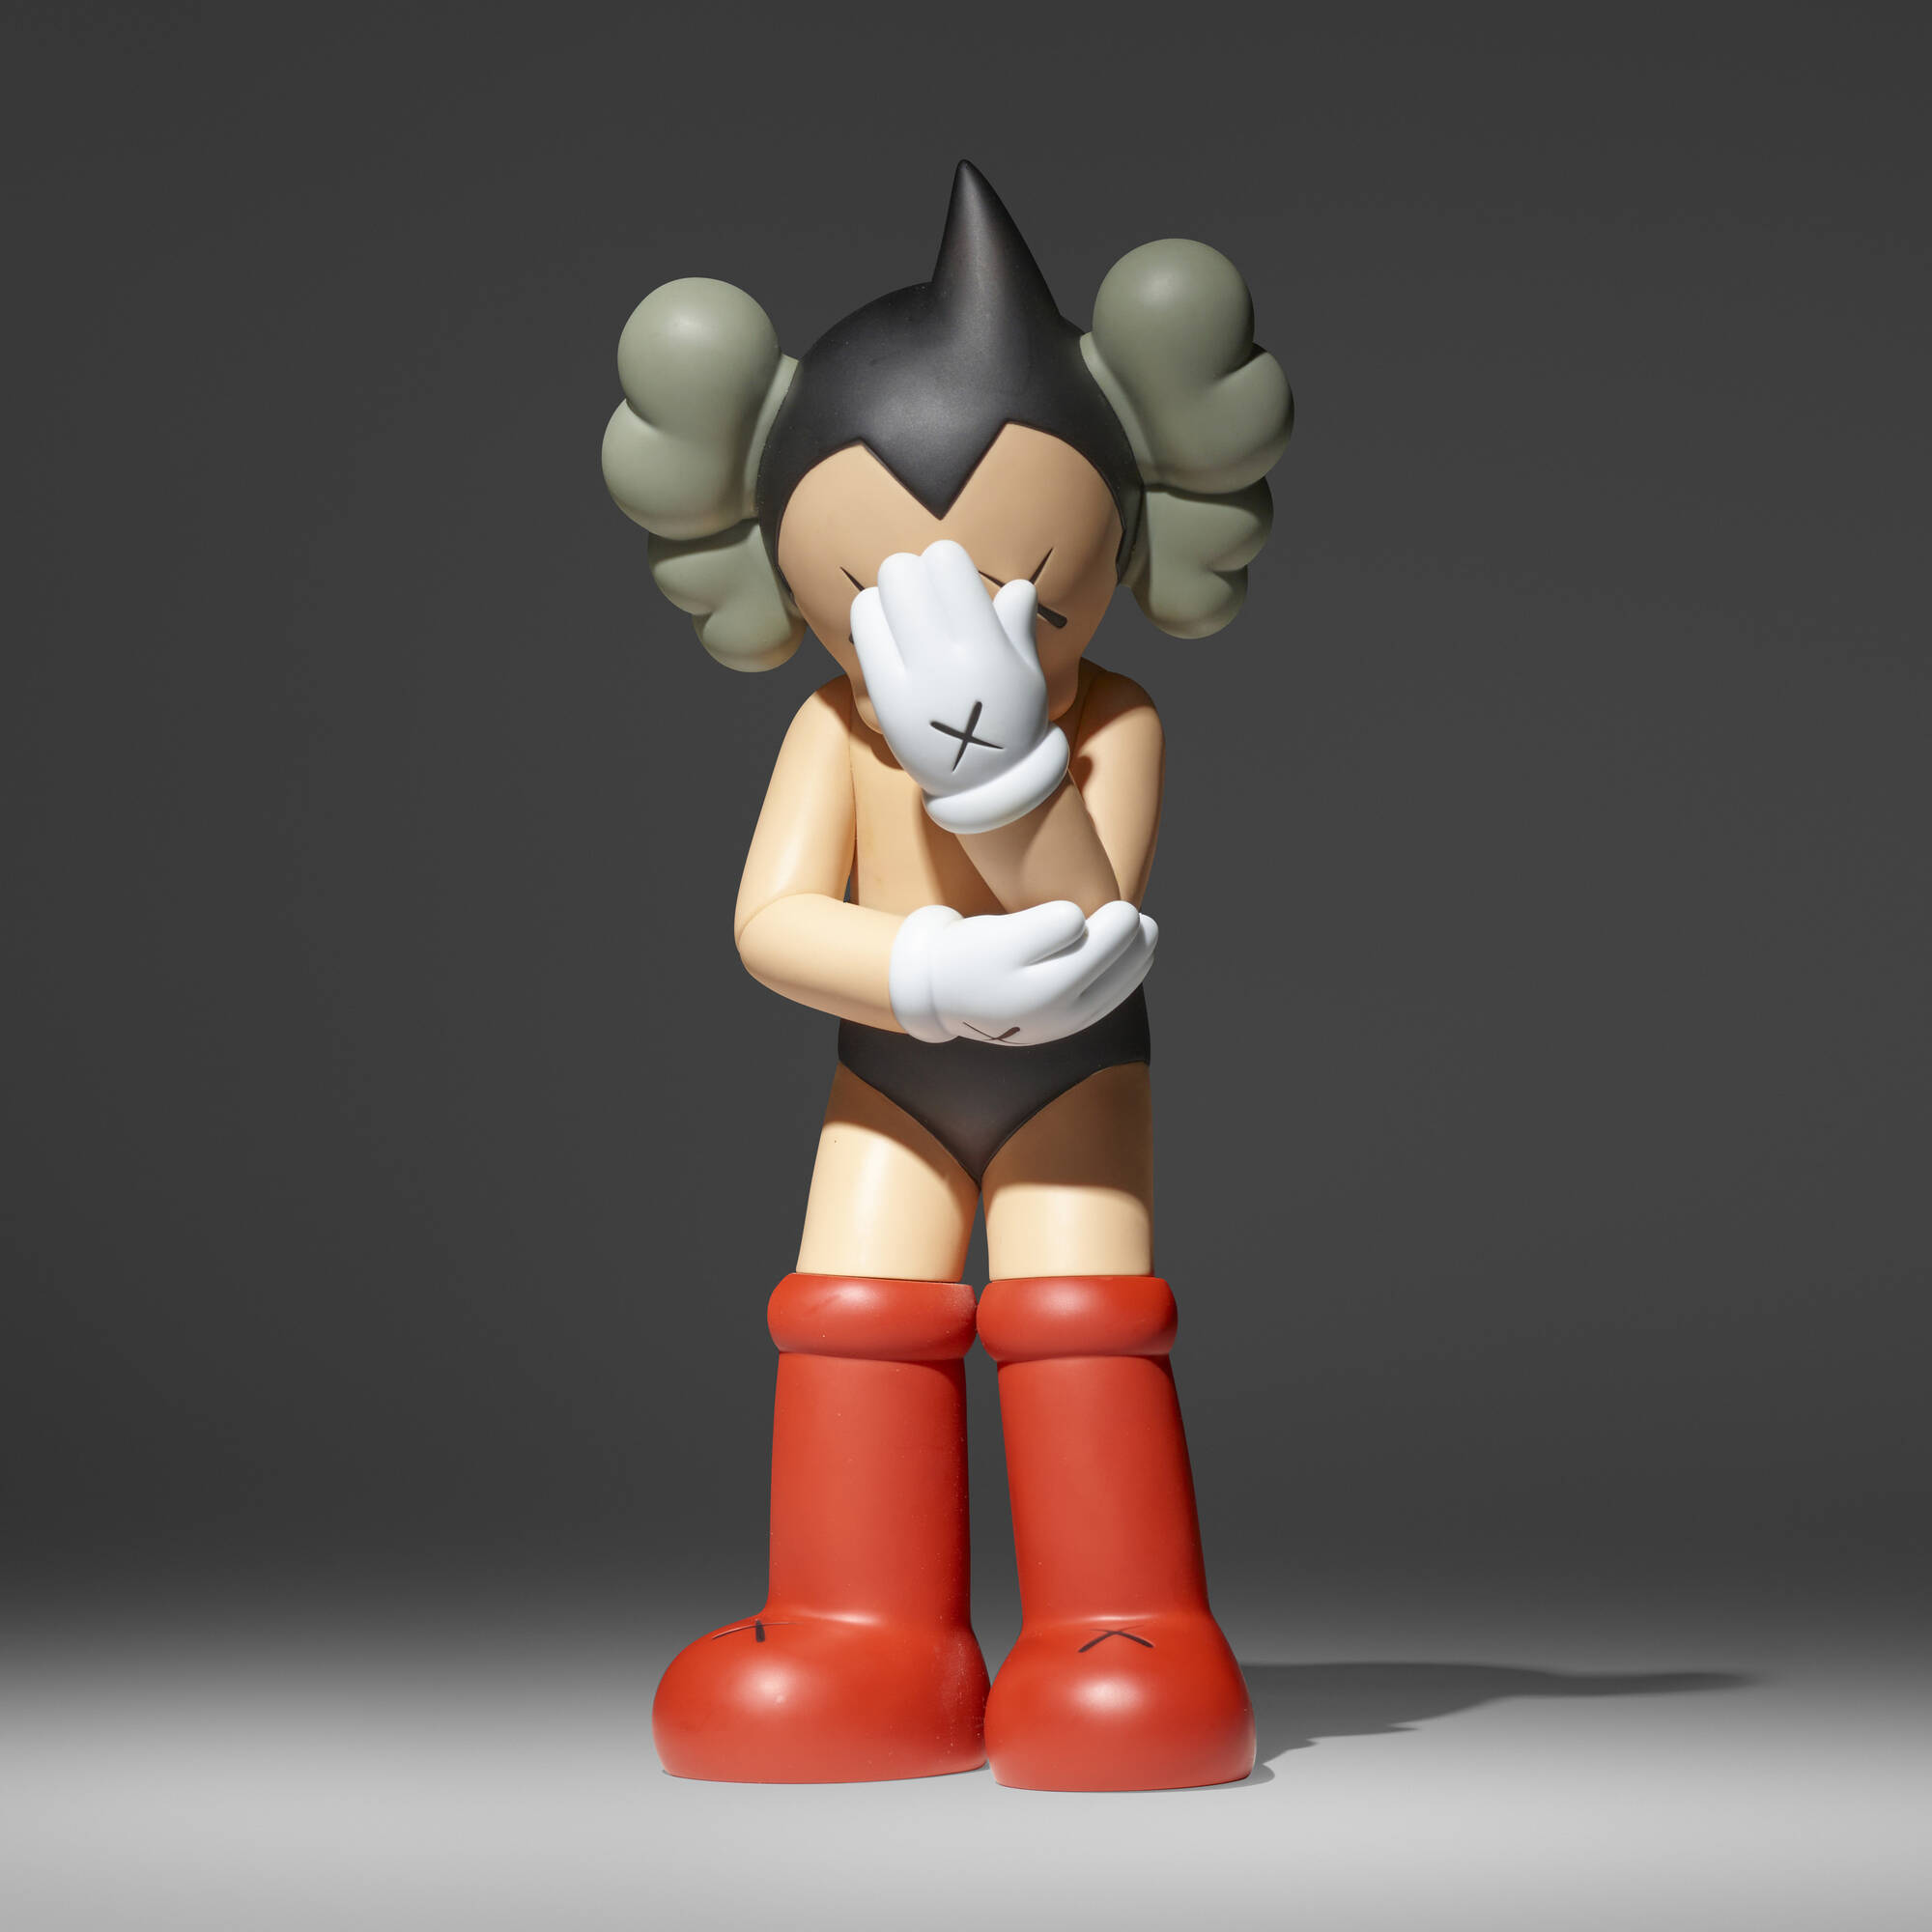 116: KAWS (BRIAN DONNELLY), Astro Boy (Red) < Curated: KAWS, 10 